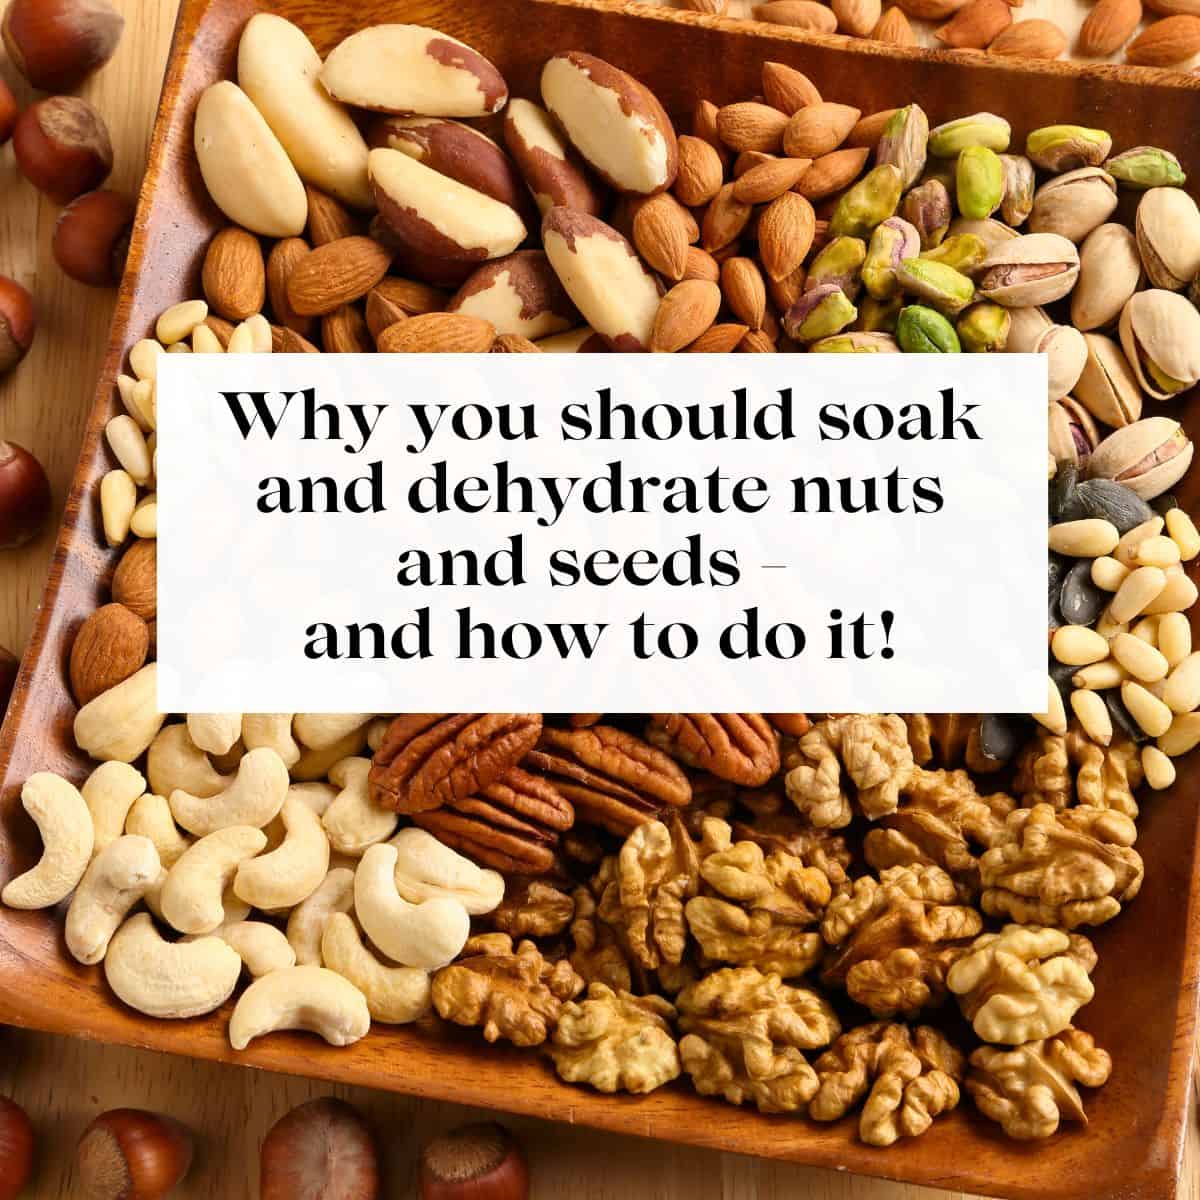 A wooden bowl with different kinds of nuts in it including pecans, walnuts, cashews and almonds with the title "why you should soak and dehydrate nuts and seeds" over them.